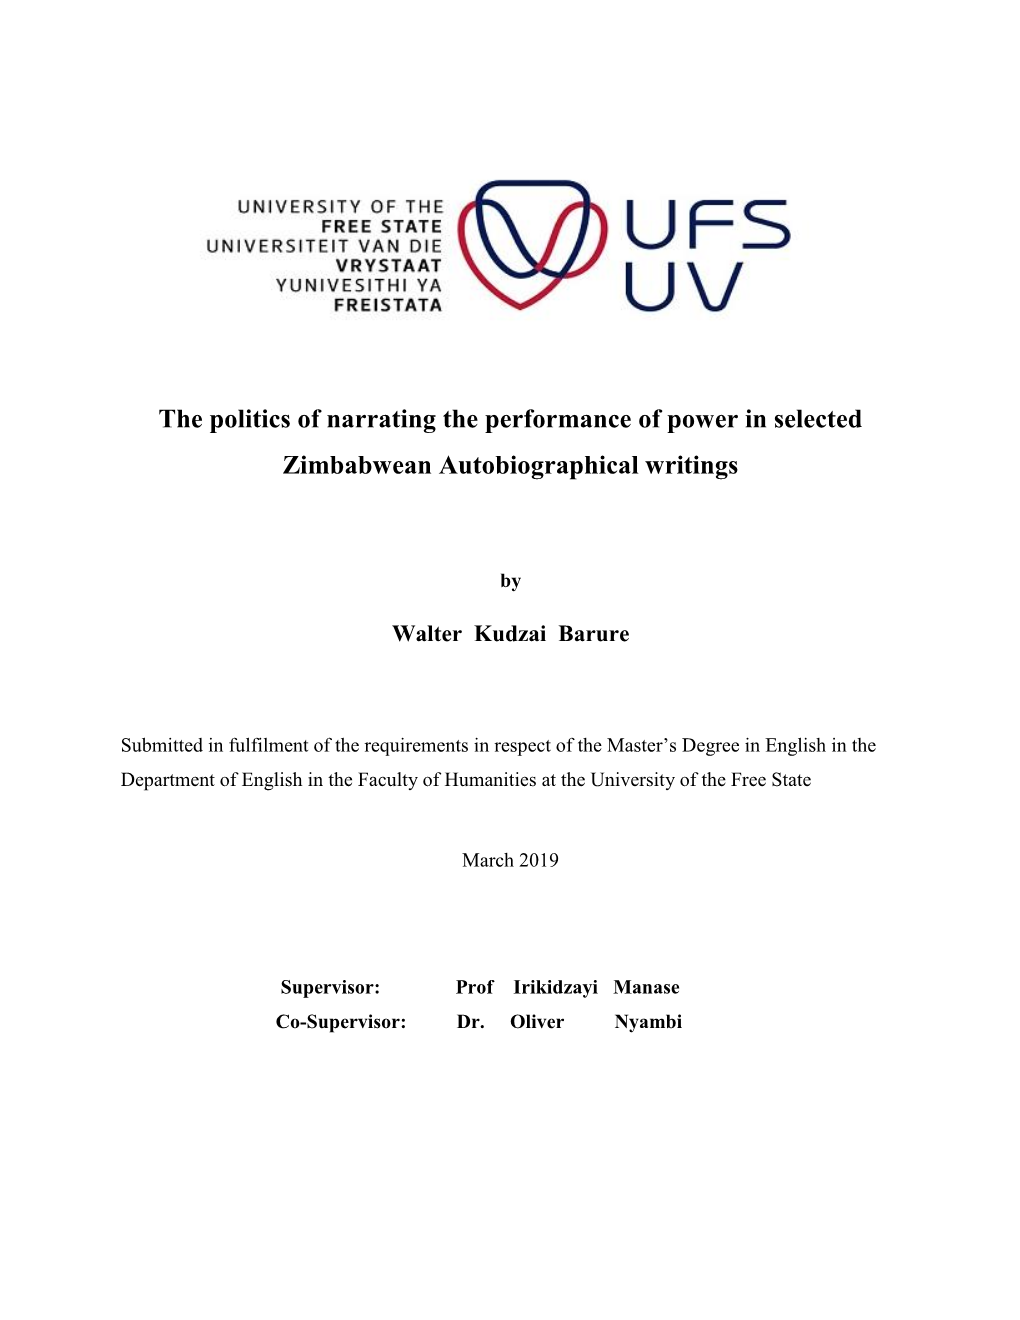 The Politics of Narrating the Performance of Power in Selected Zimbabwean Autobiographical Writings